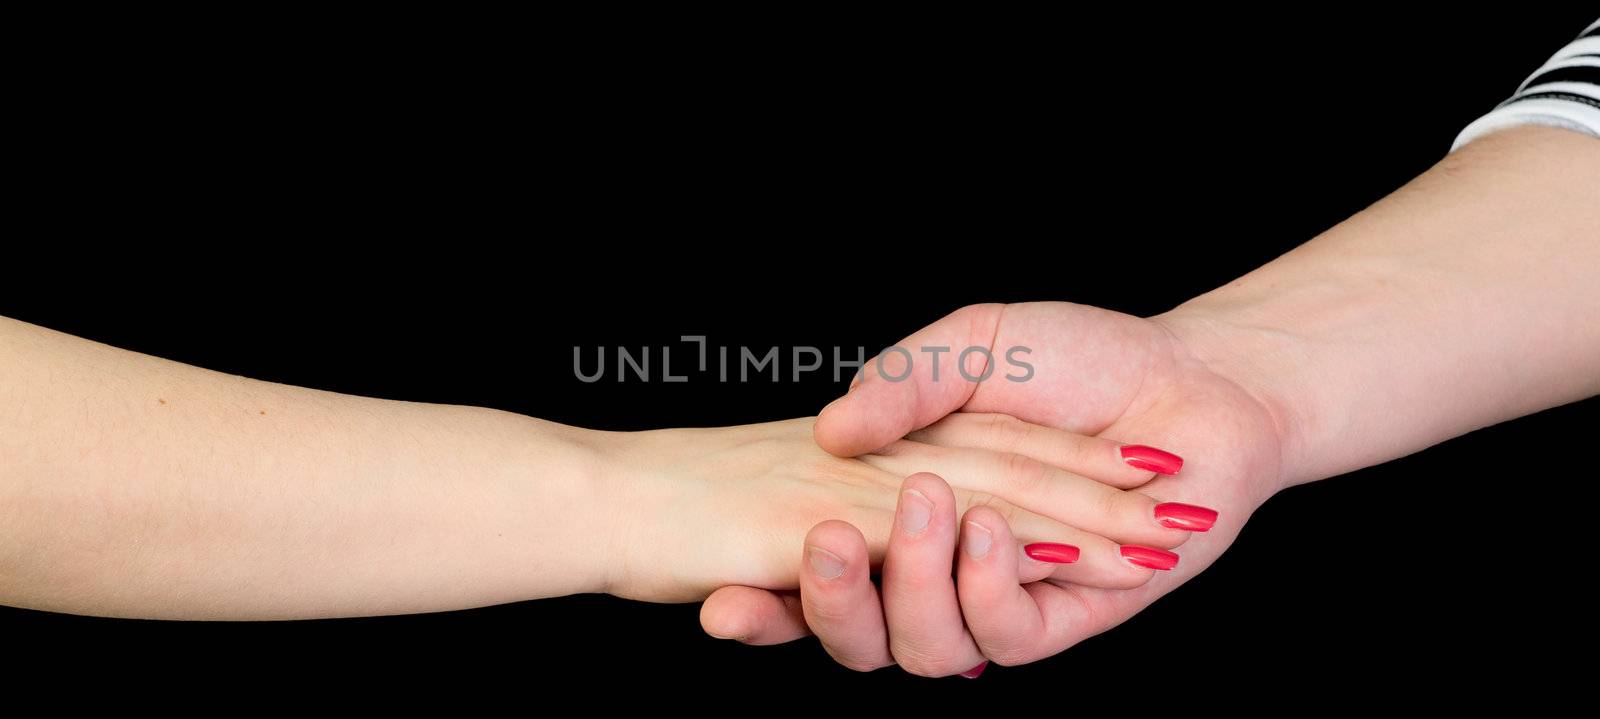 Female hand in a man's hand on a black background